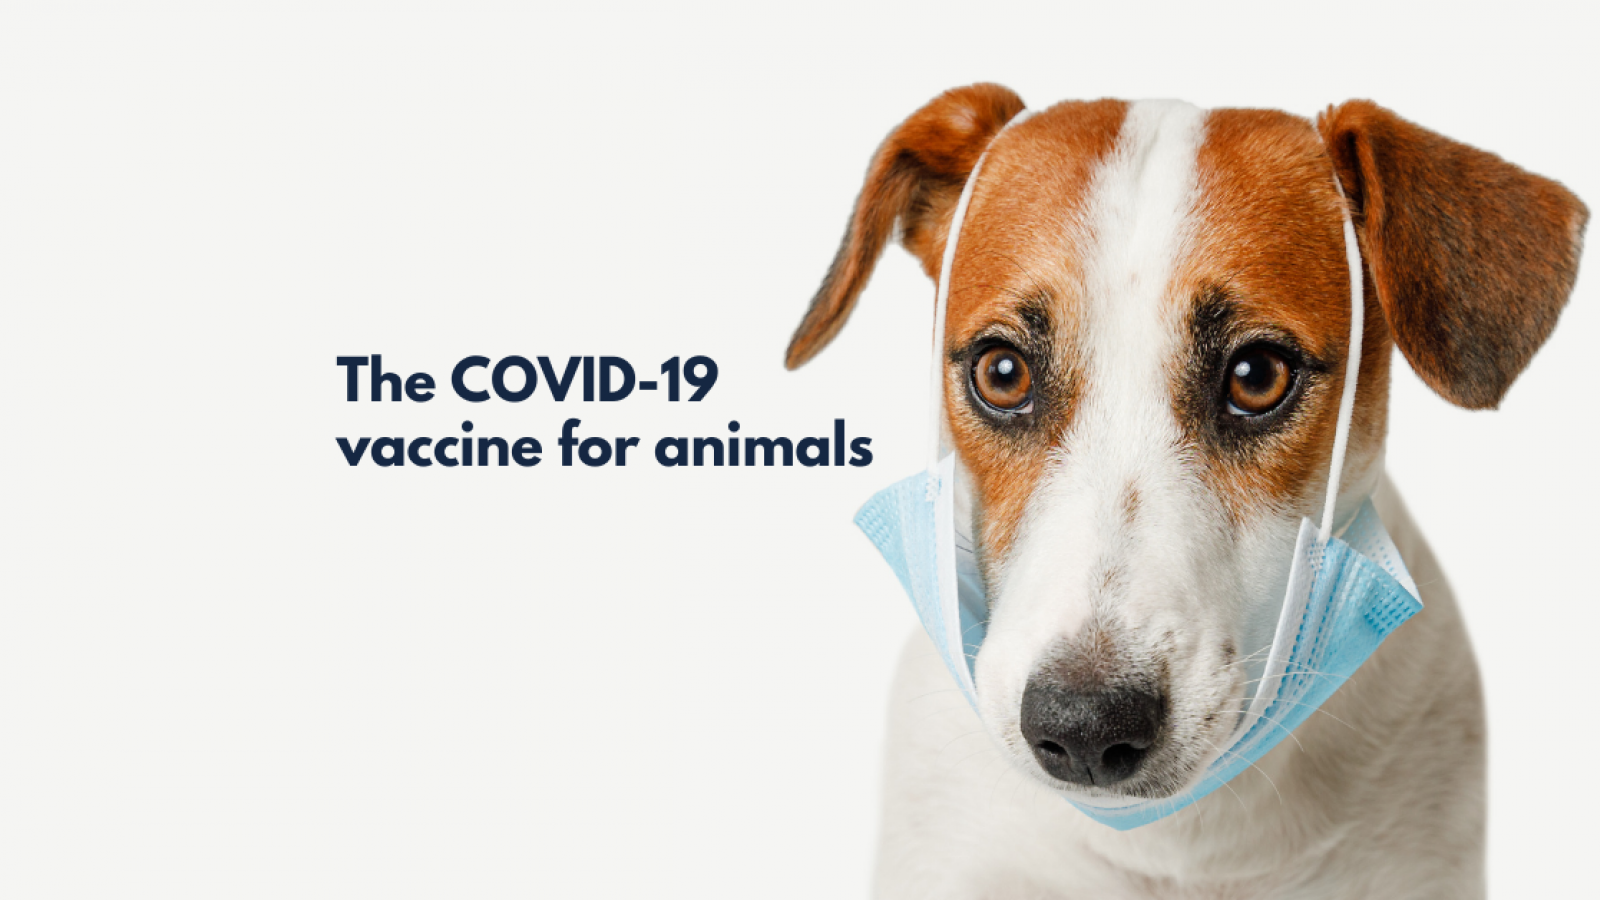 The COVID-19 vaccine for animals